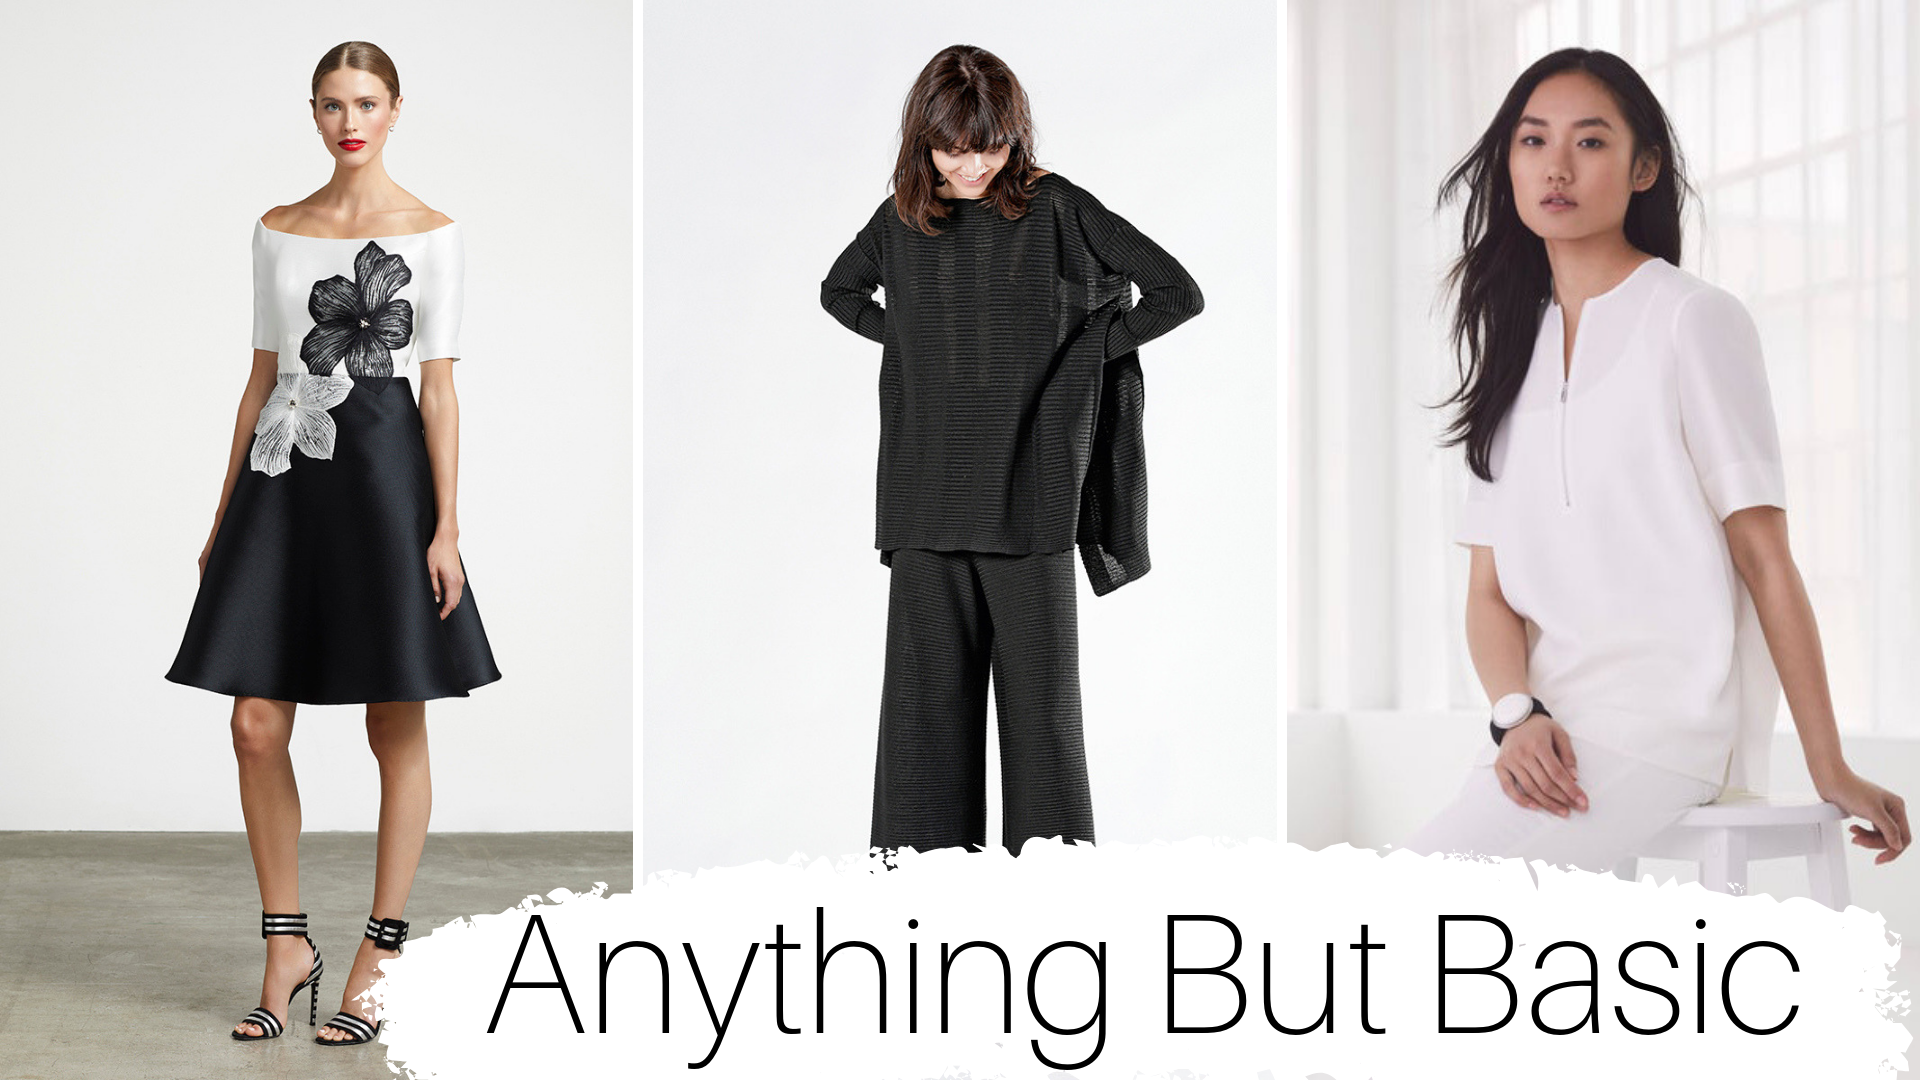 Black & White Wardrobe Essentials That are Anything But Basic